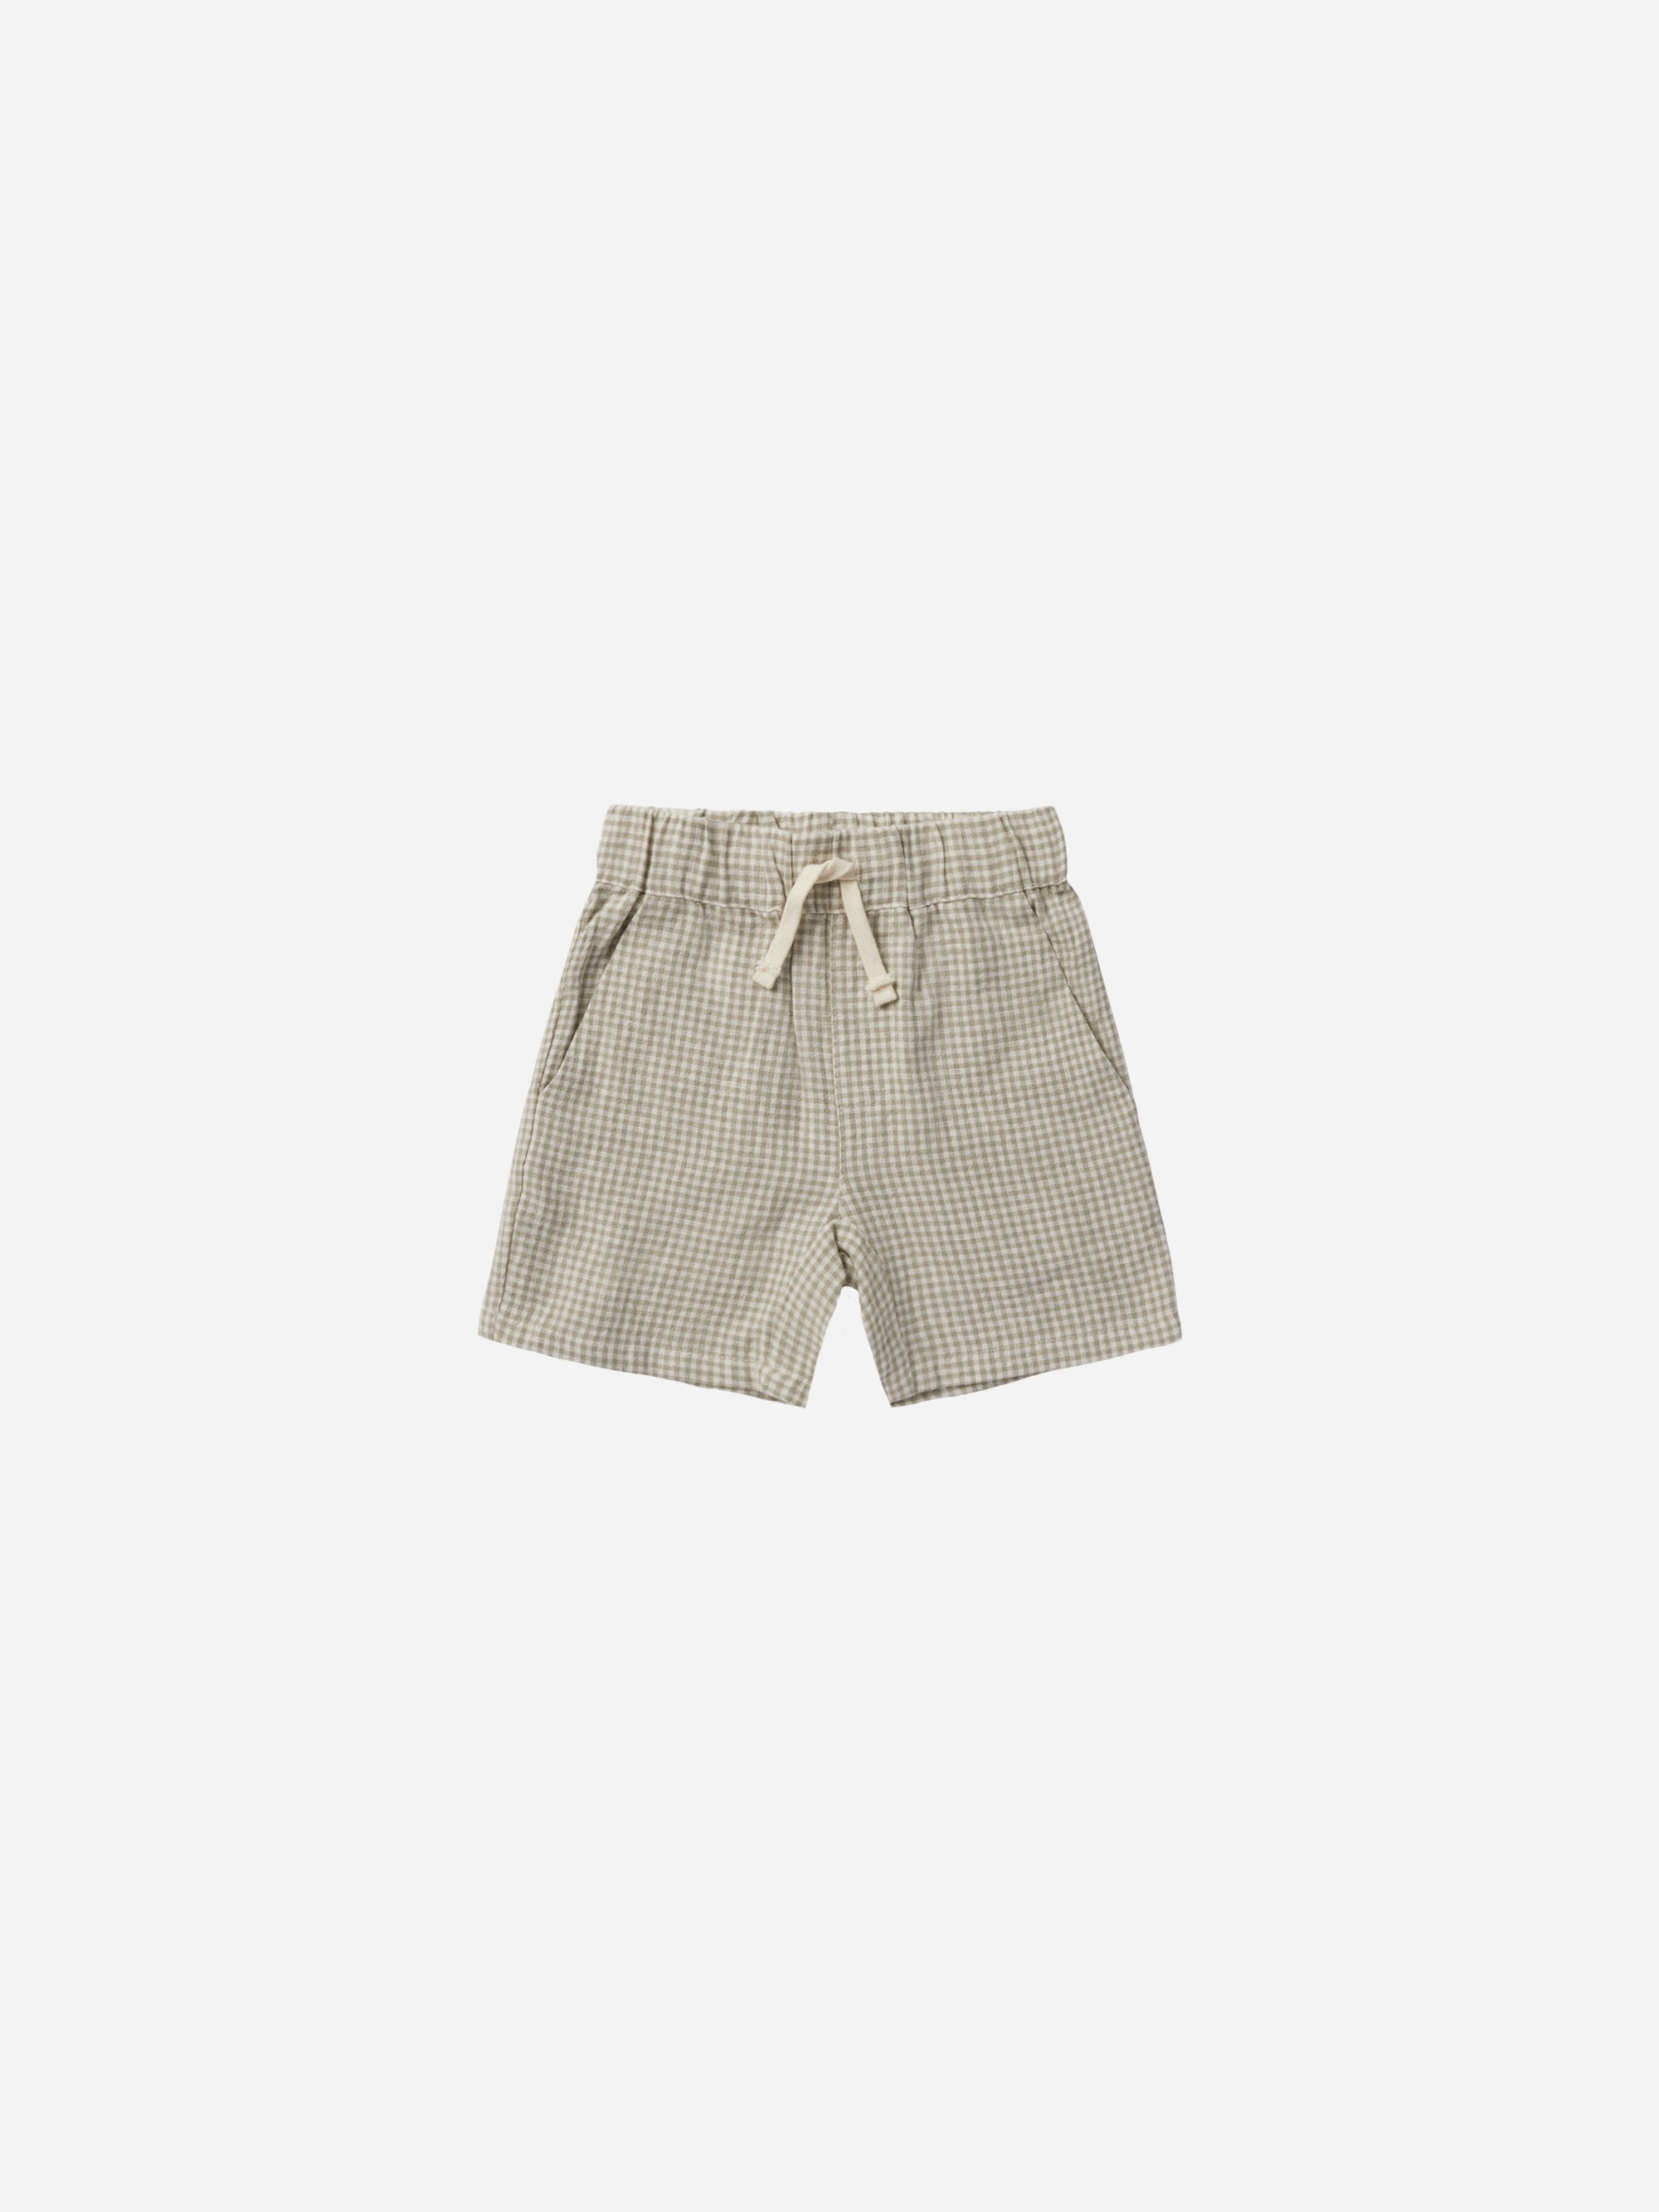 Bermuda Short || Sage Gingham - Rylee + Cru | Kids Clothes | Trendy Baby Clothes | Modern Infant Outfits |